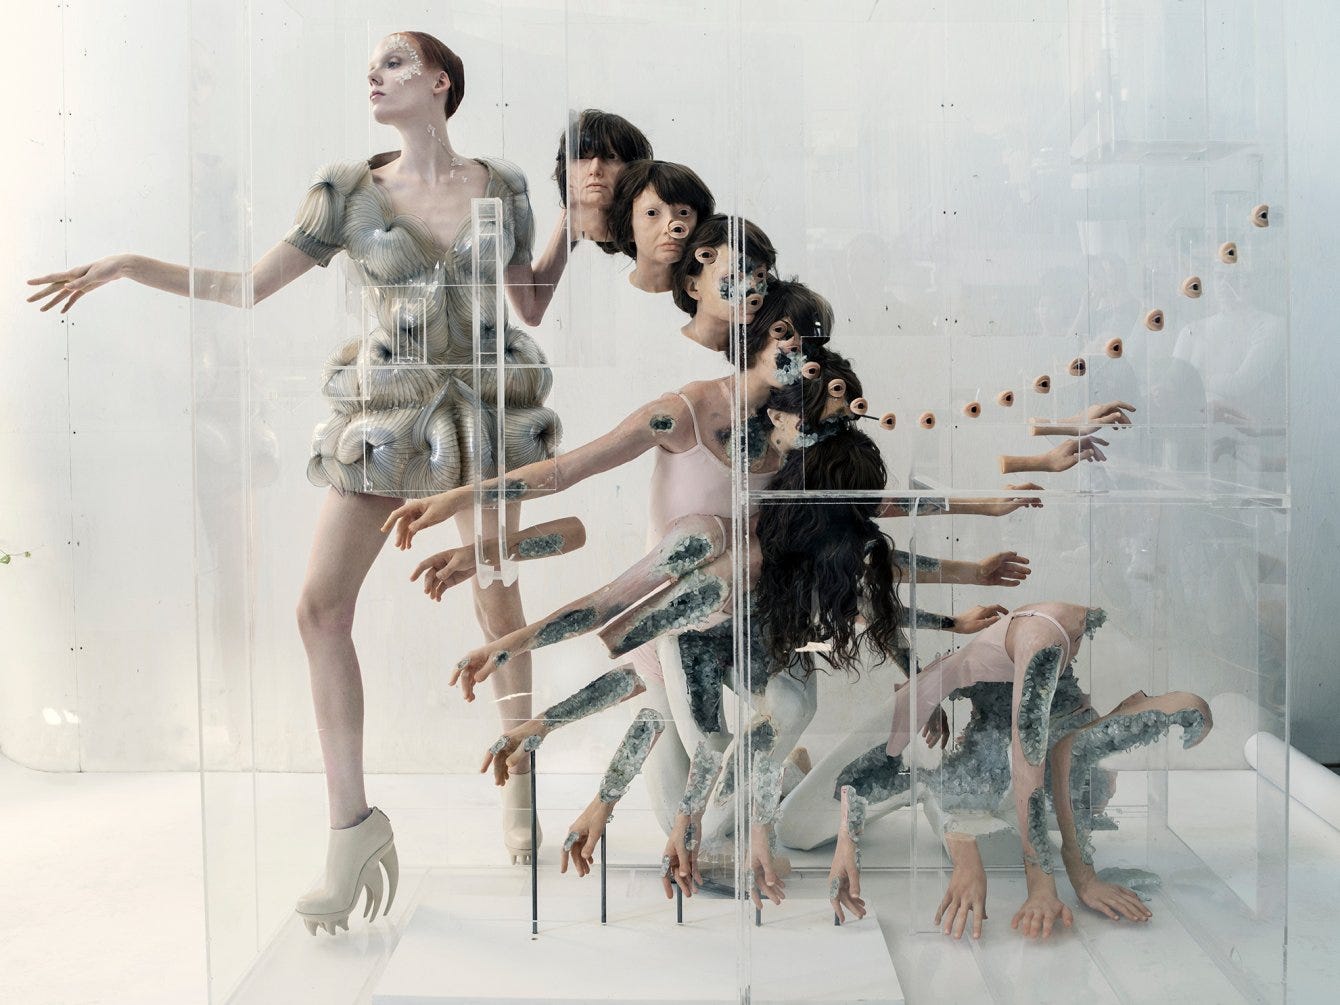 Collaboration with David Altmejd and Tim Walker